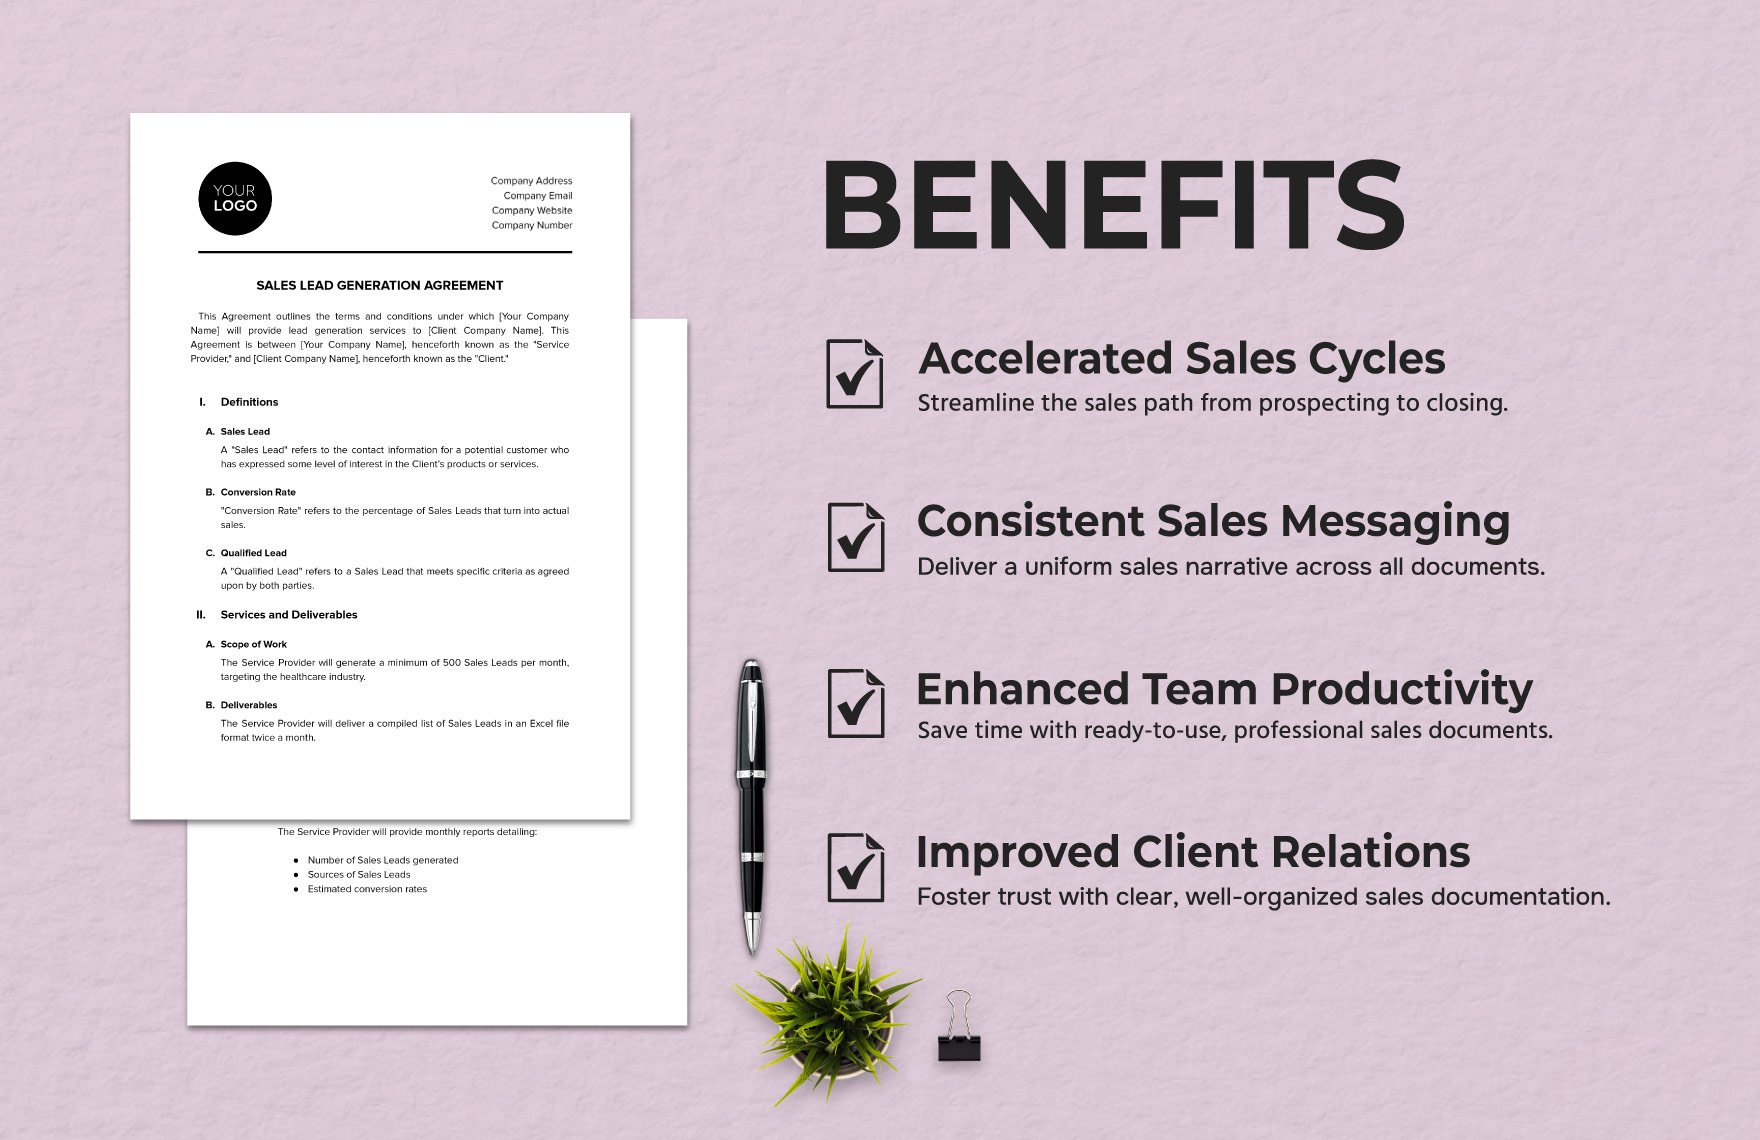 Sales Lead Generation Agreement Template